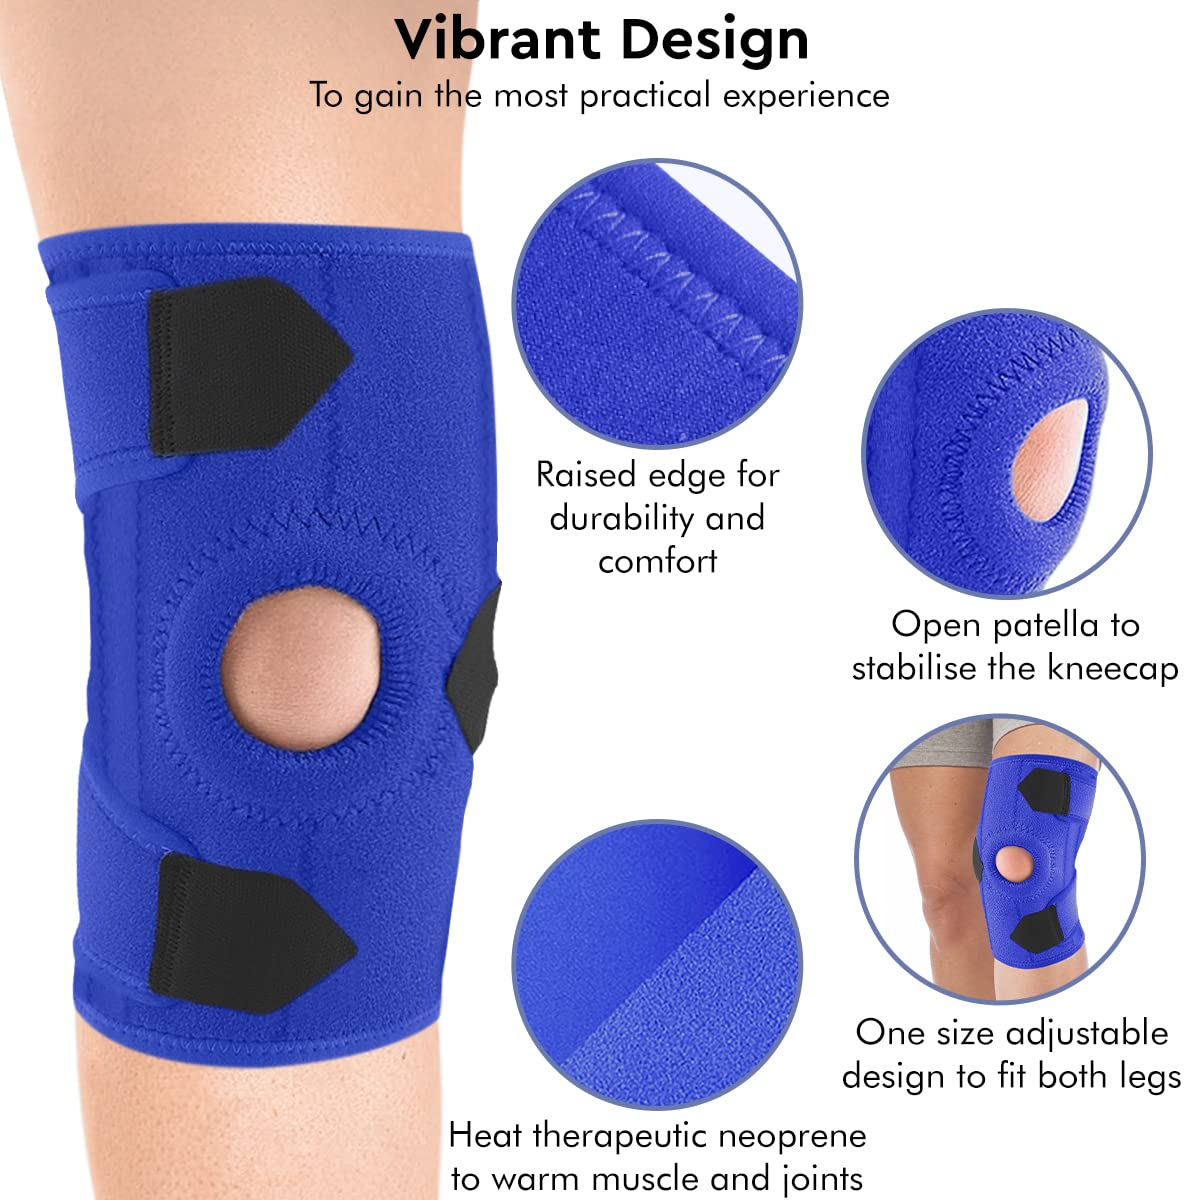 Knee brace showcasing various features, providing support and stability for the knee joint.